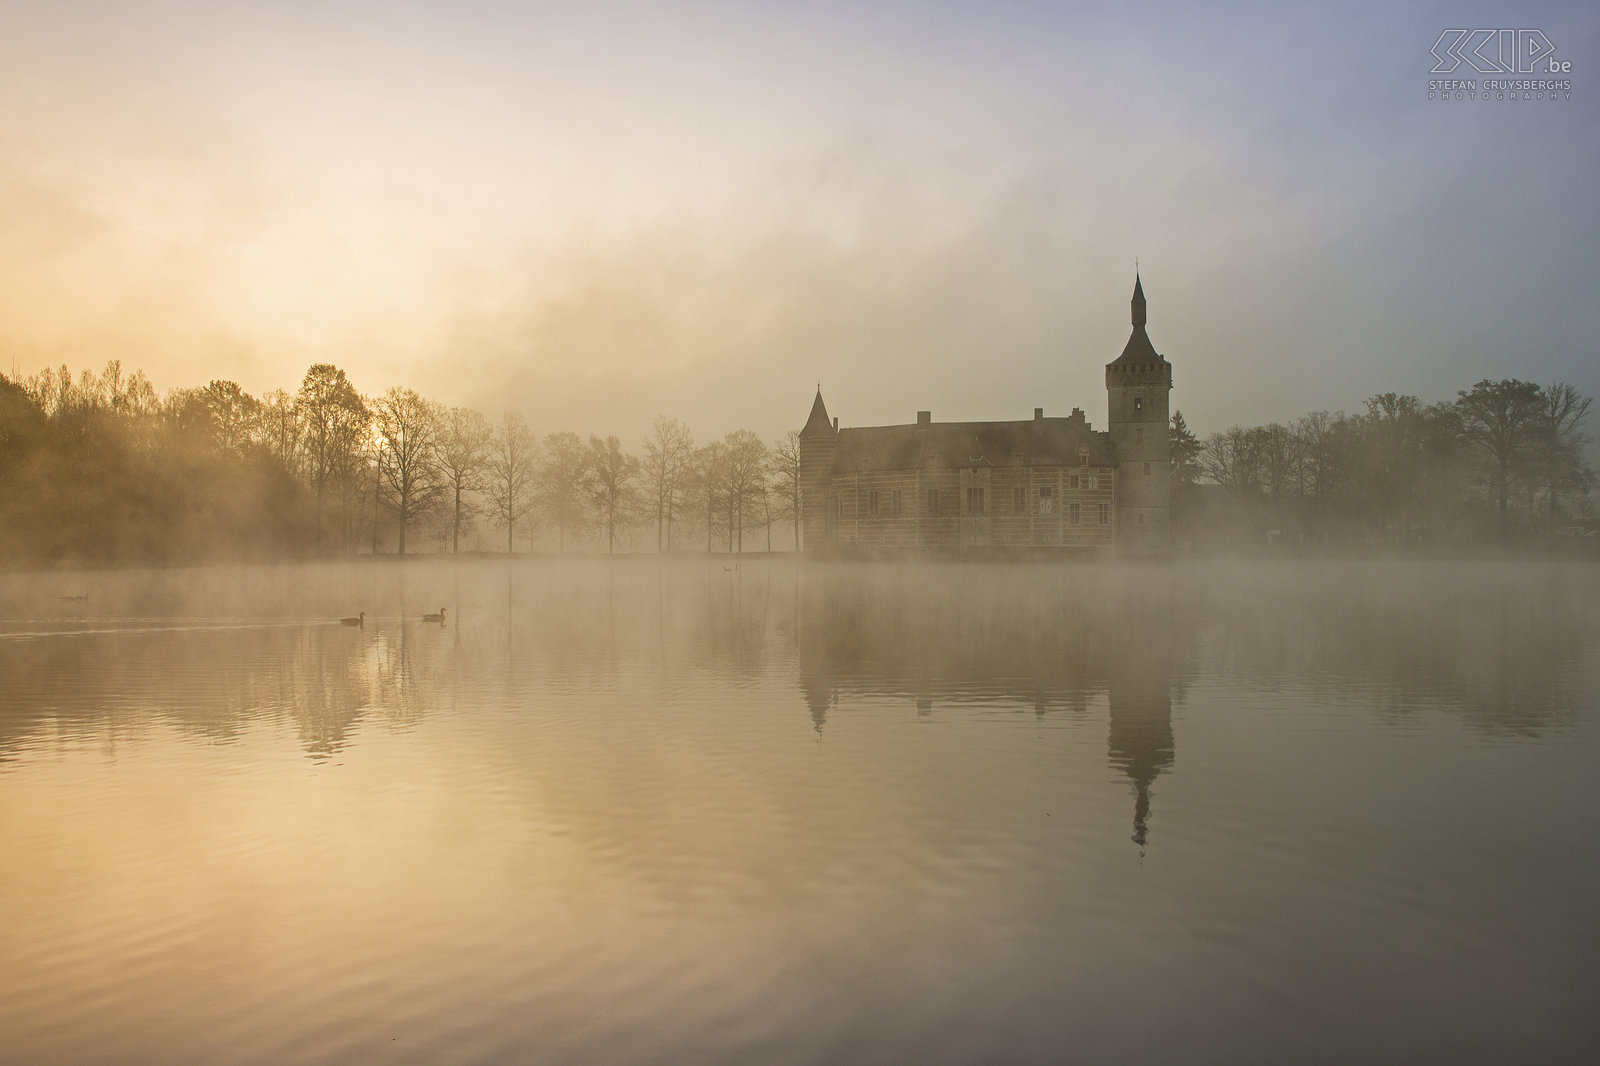 Sint-Pieters-Rode - Morning fog at the pool of the castle of Horst The castle and the chapel of Horst are photogenic landmarks near my new home. So in recent months I went out to photograph them several times, mostly in the evening and at night or when there were special weather conditions. I tried to create some unique photos of these monuments that differ from the images that already have been captured by many other people.<br />
 <br />
The castle of Horst is located in the village of Sint-Pieters-Rode (Holsbeek, Belgium). The castle was built in the mid-14th century and is still quite authentic. The former living rooms, made of brick and sandstone, are mostly from the 16th and 17th centuries.  Stefan Cruysberghs